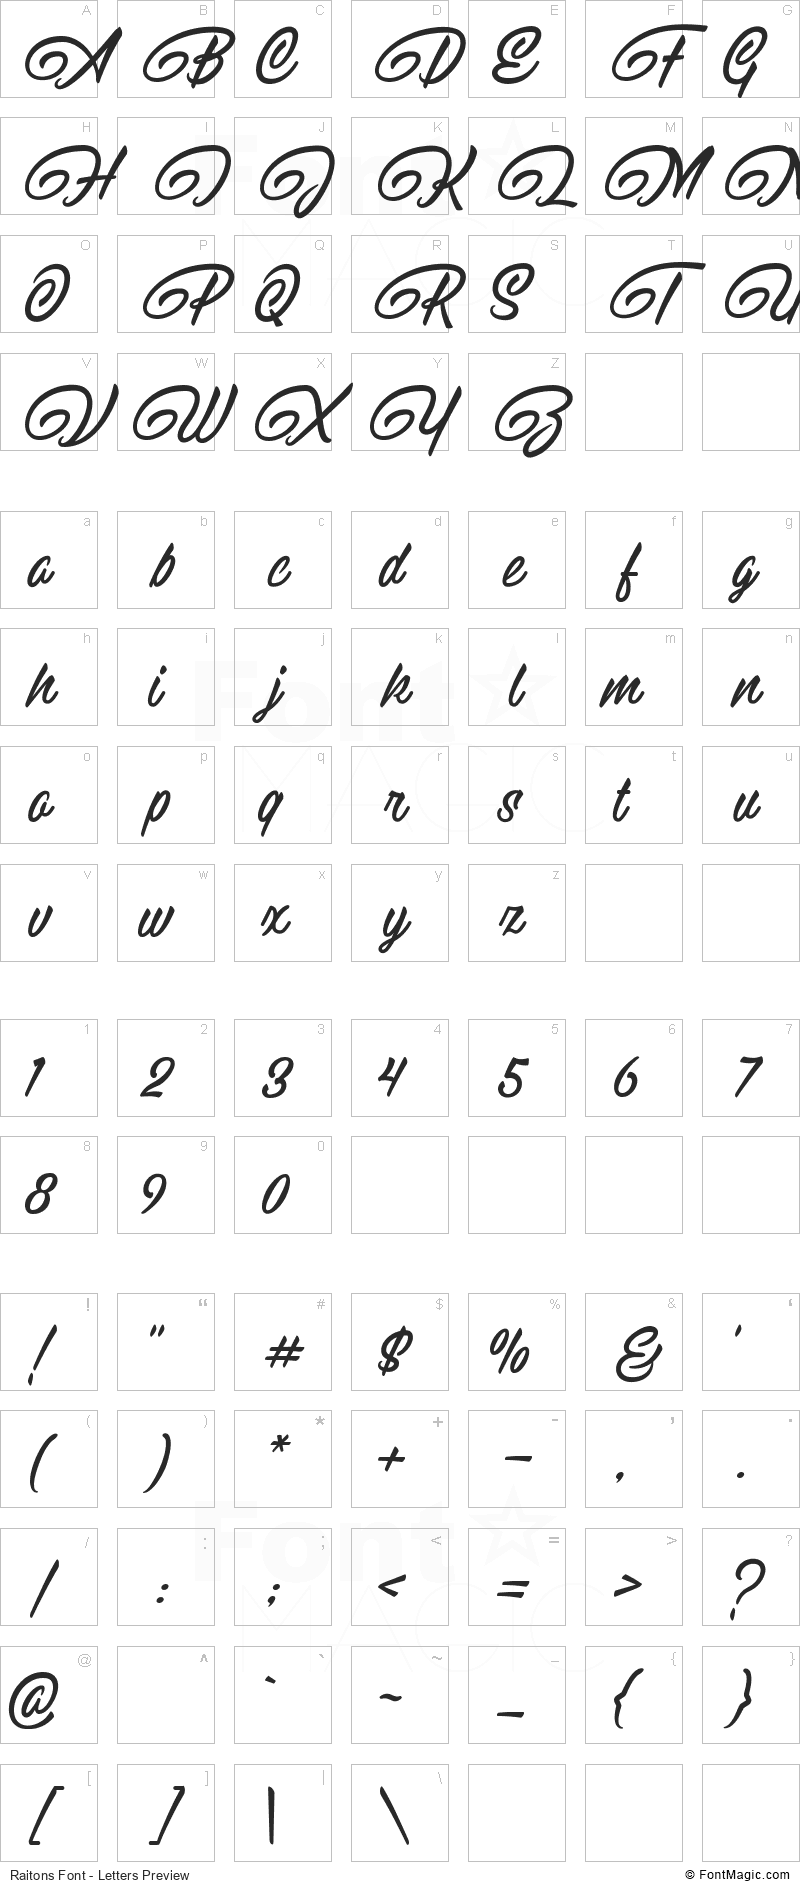 Raitons Font - All Latters Preview Chart